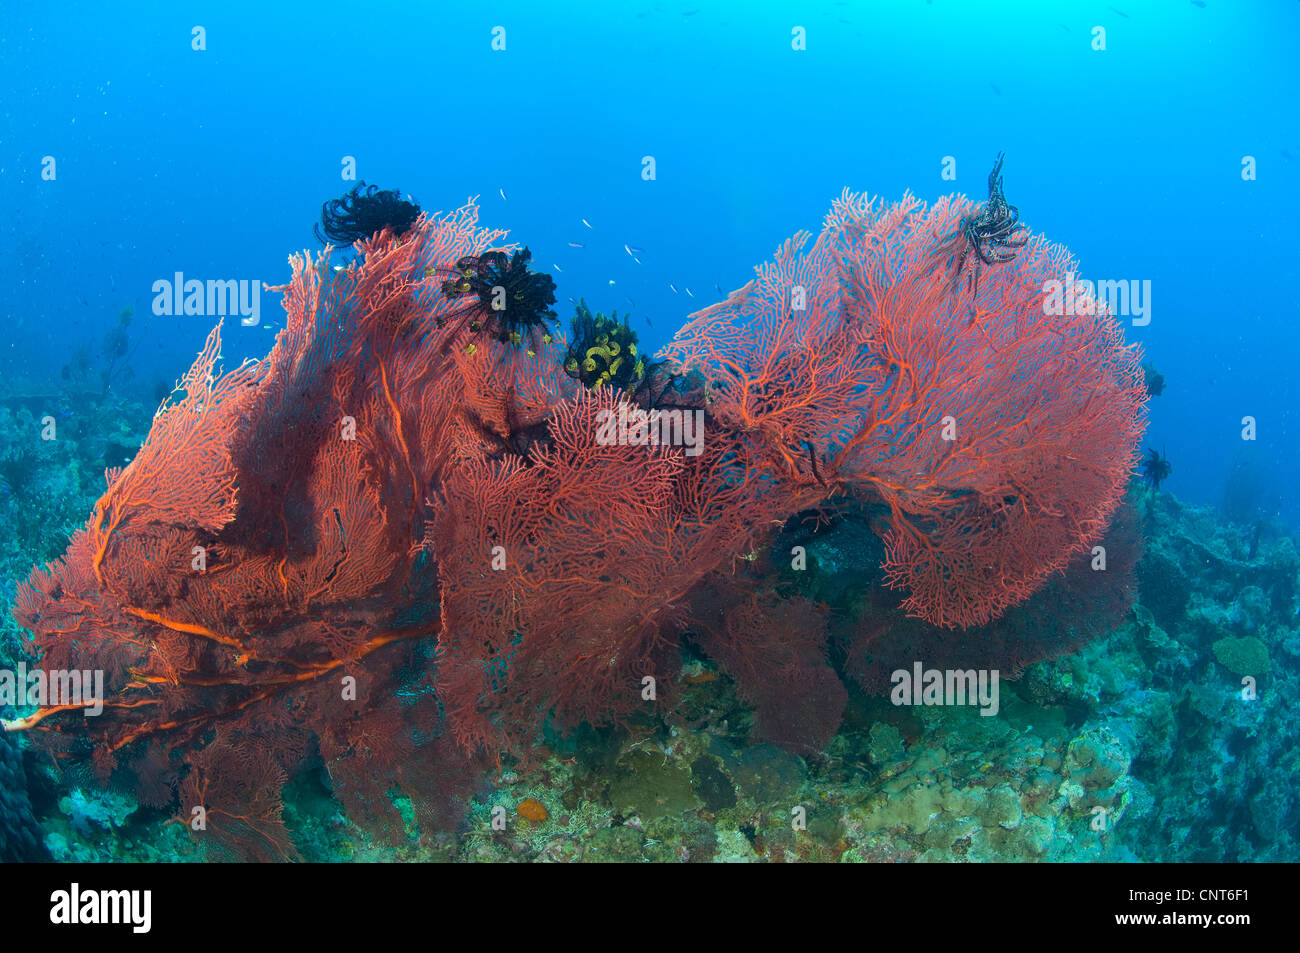 A red sea fan (Melthaea sp.) with crinoid feather stars, Kimbe Bay, Papua New Guinea. Stock Photo